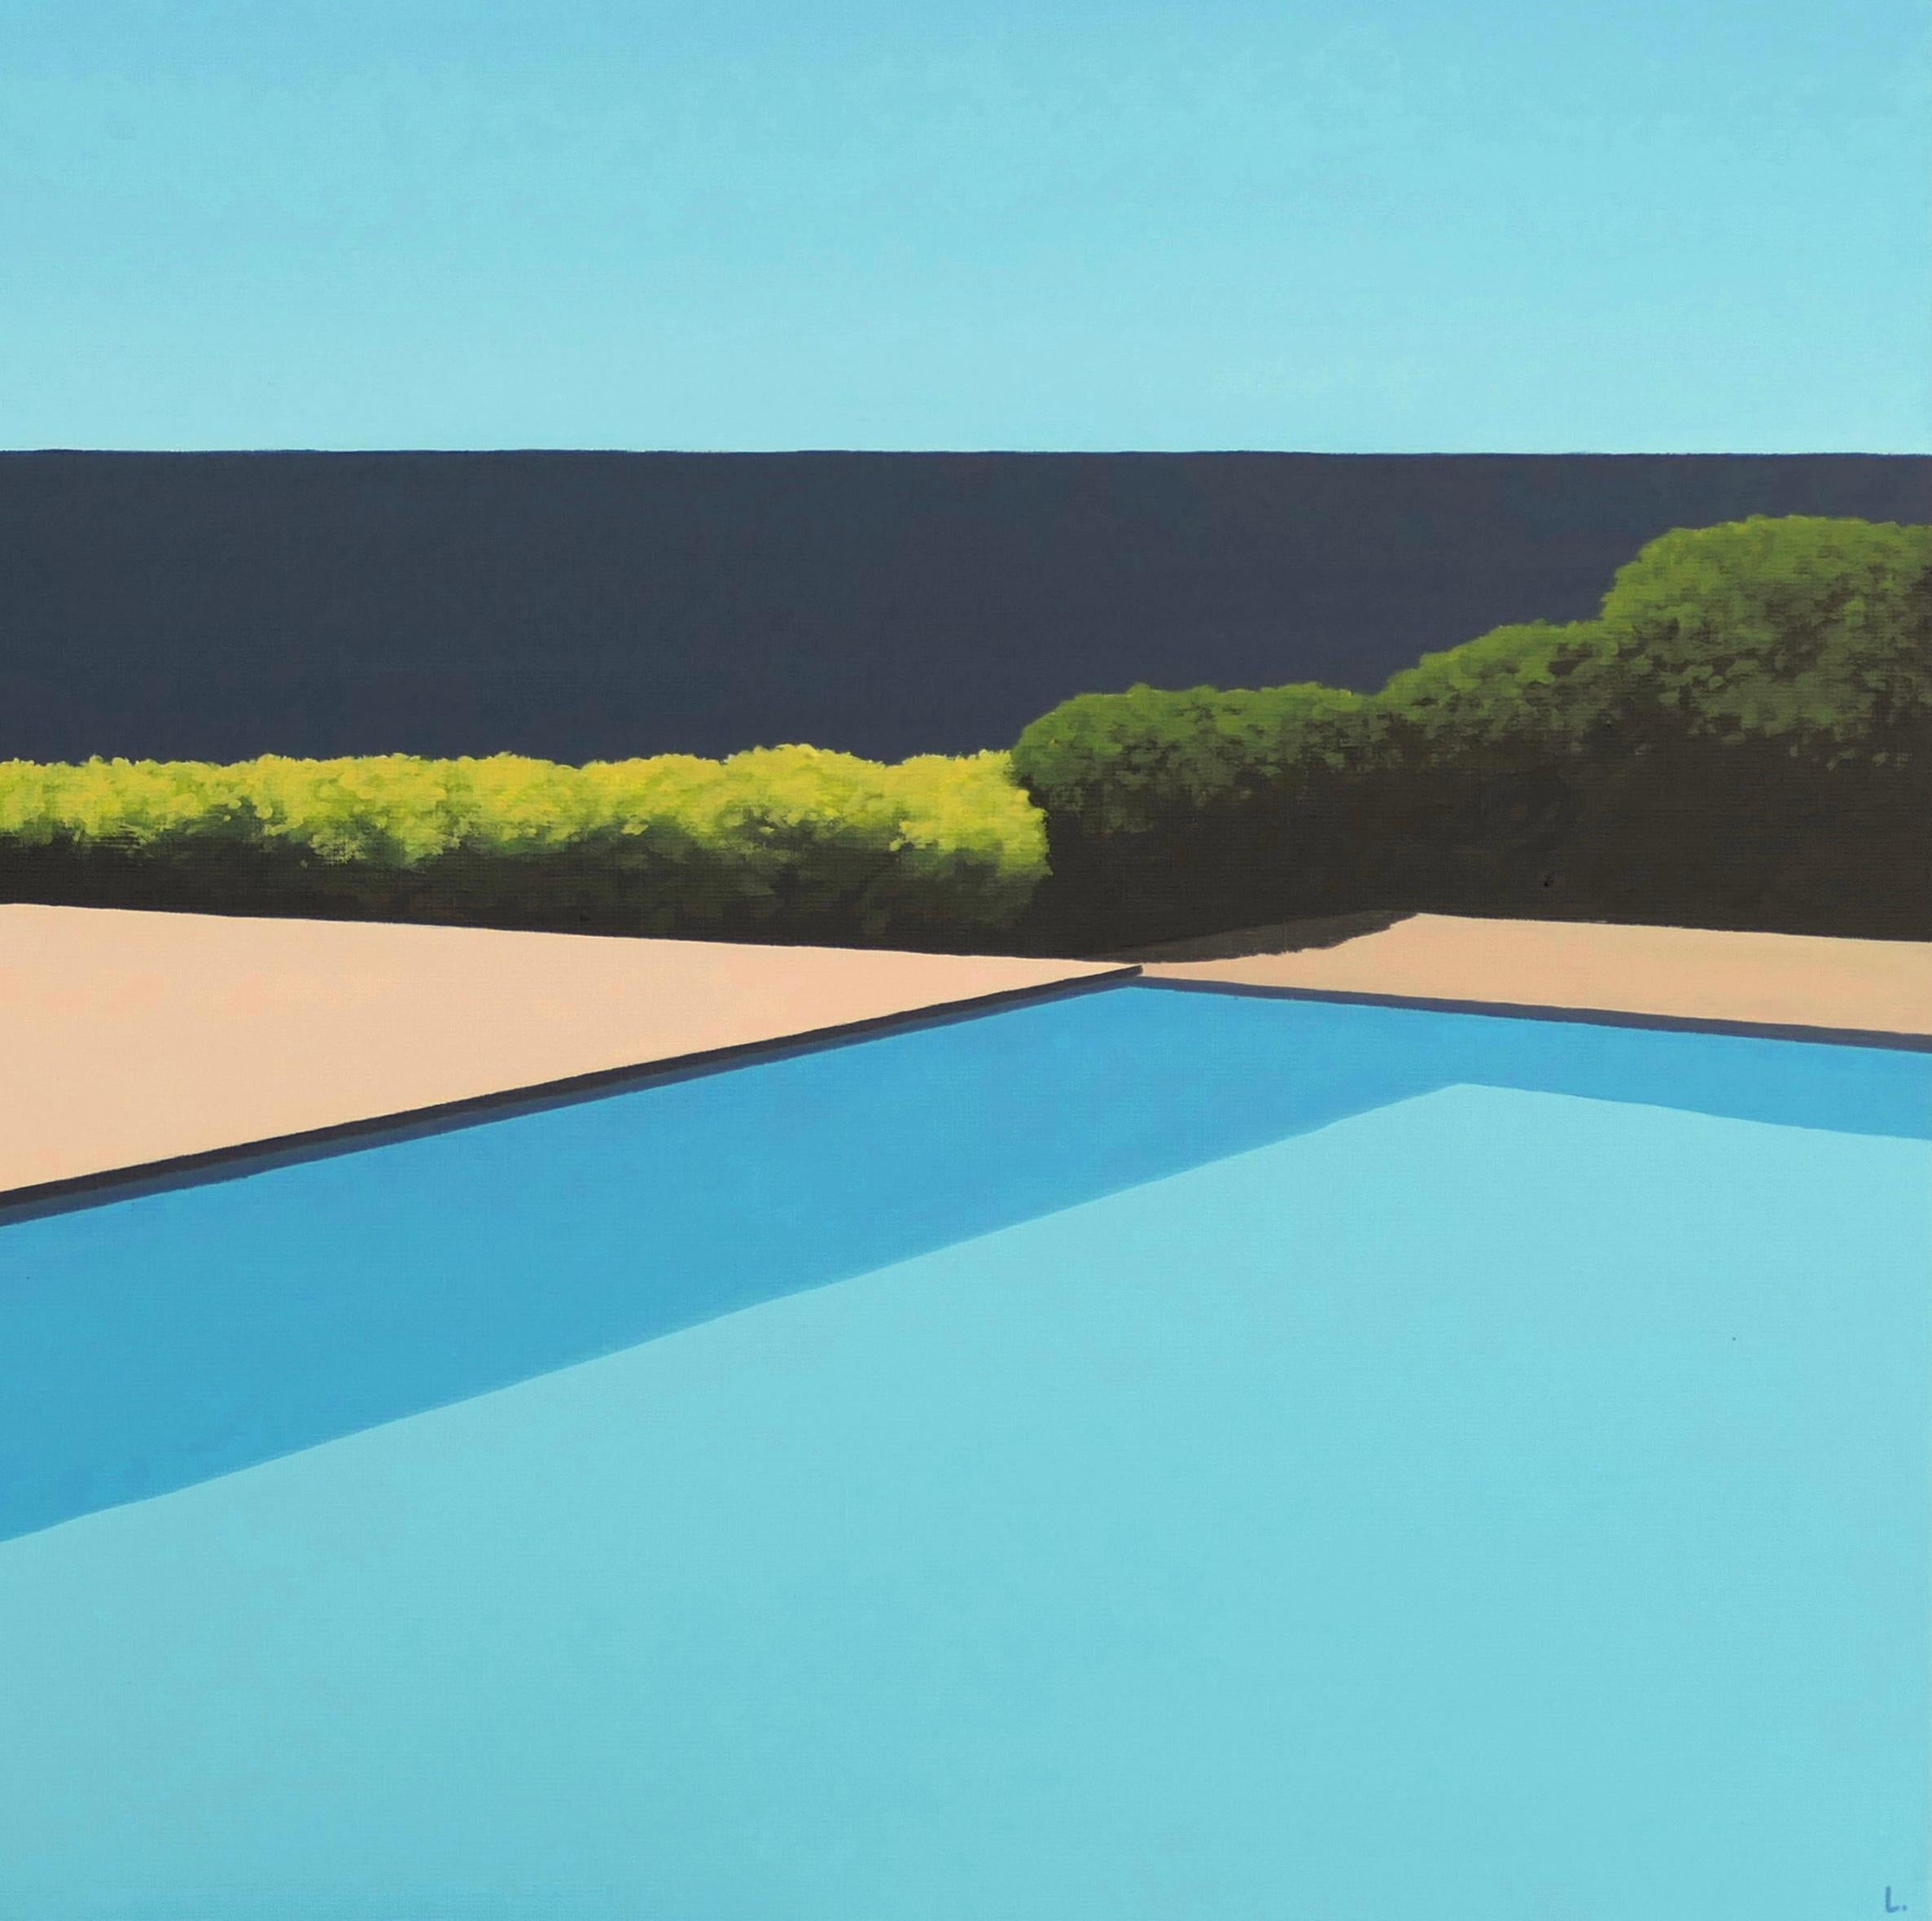 Pineapple by the pool - landscape painting 2